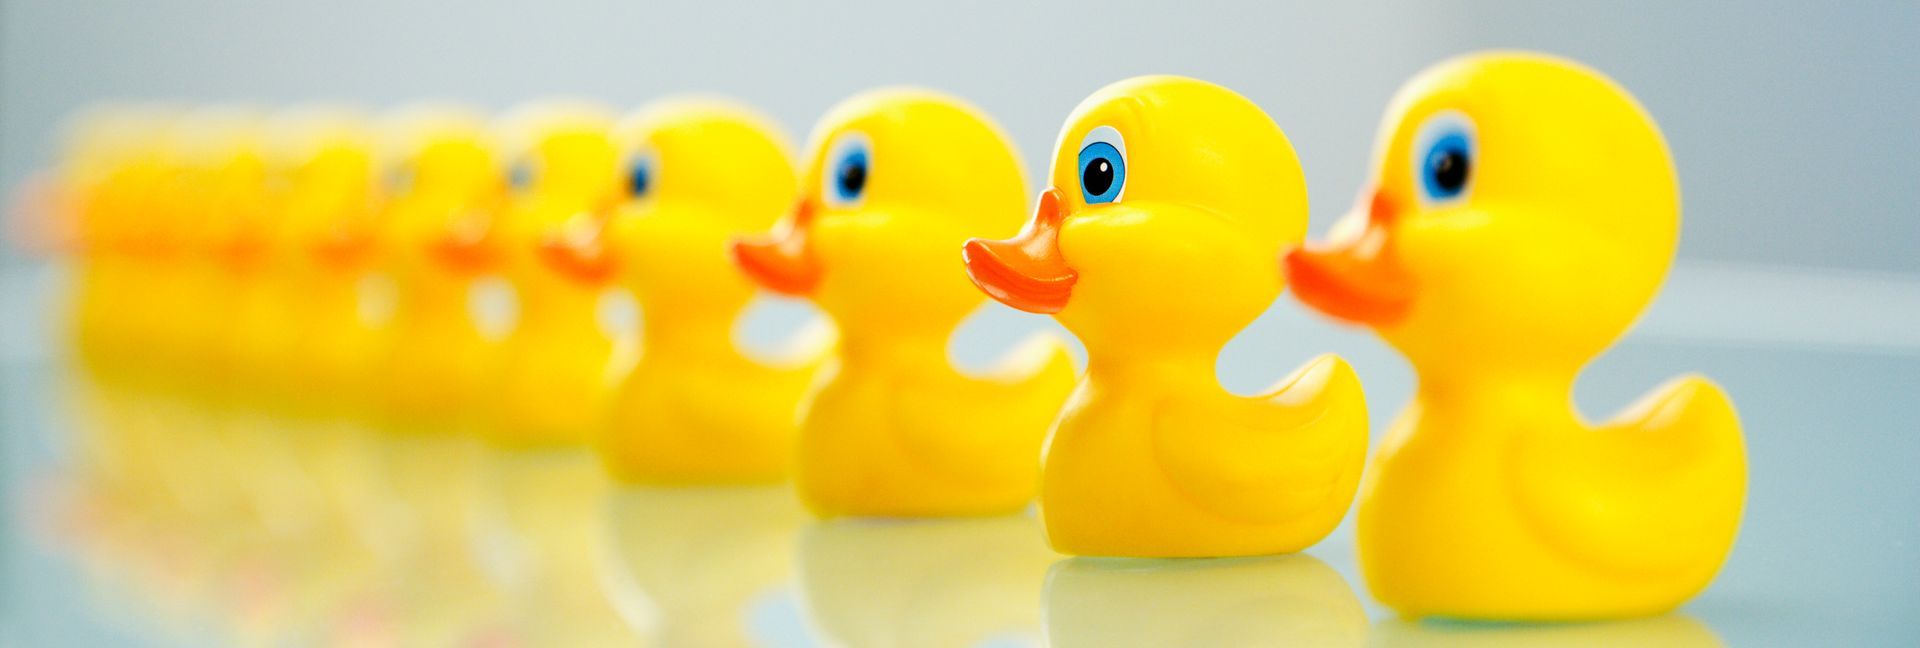 A row of yellow rubber ducks